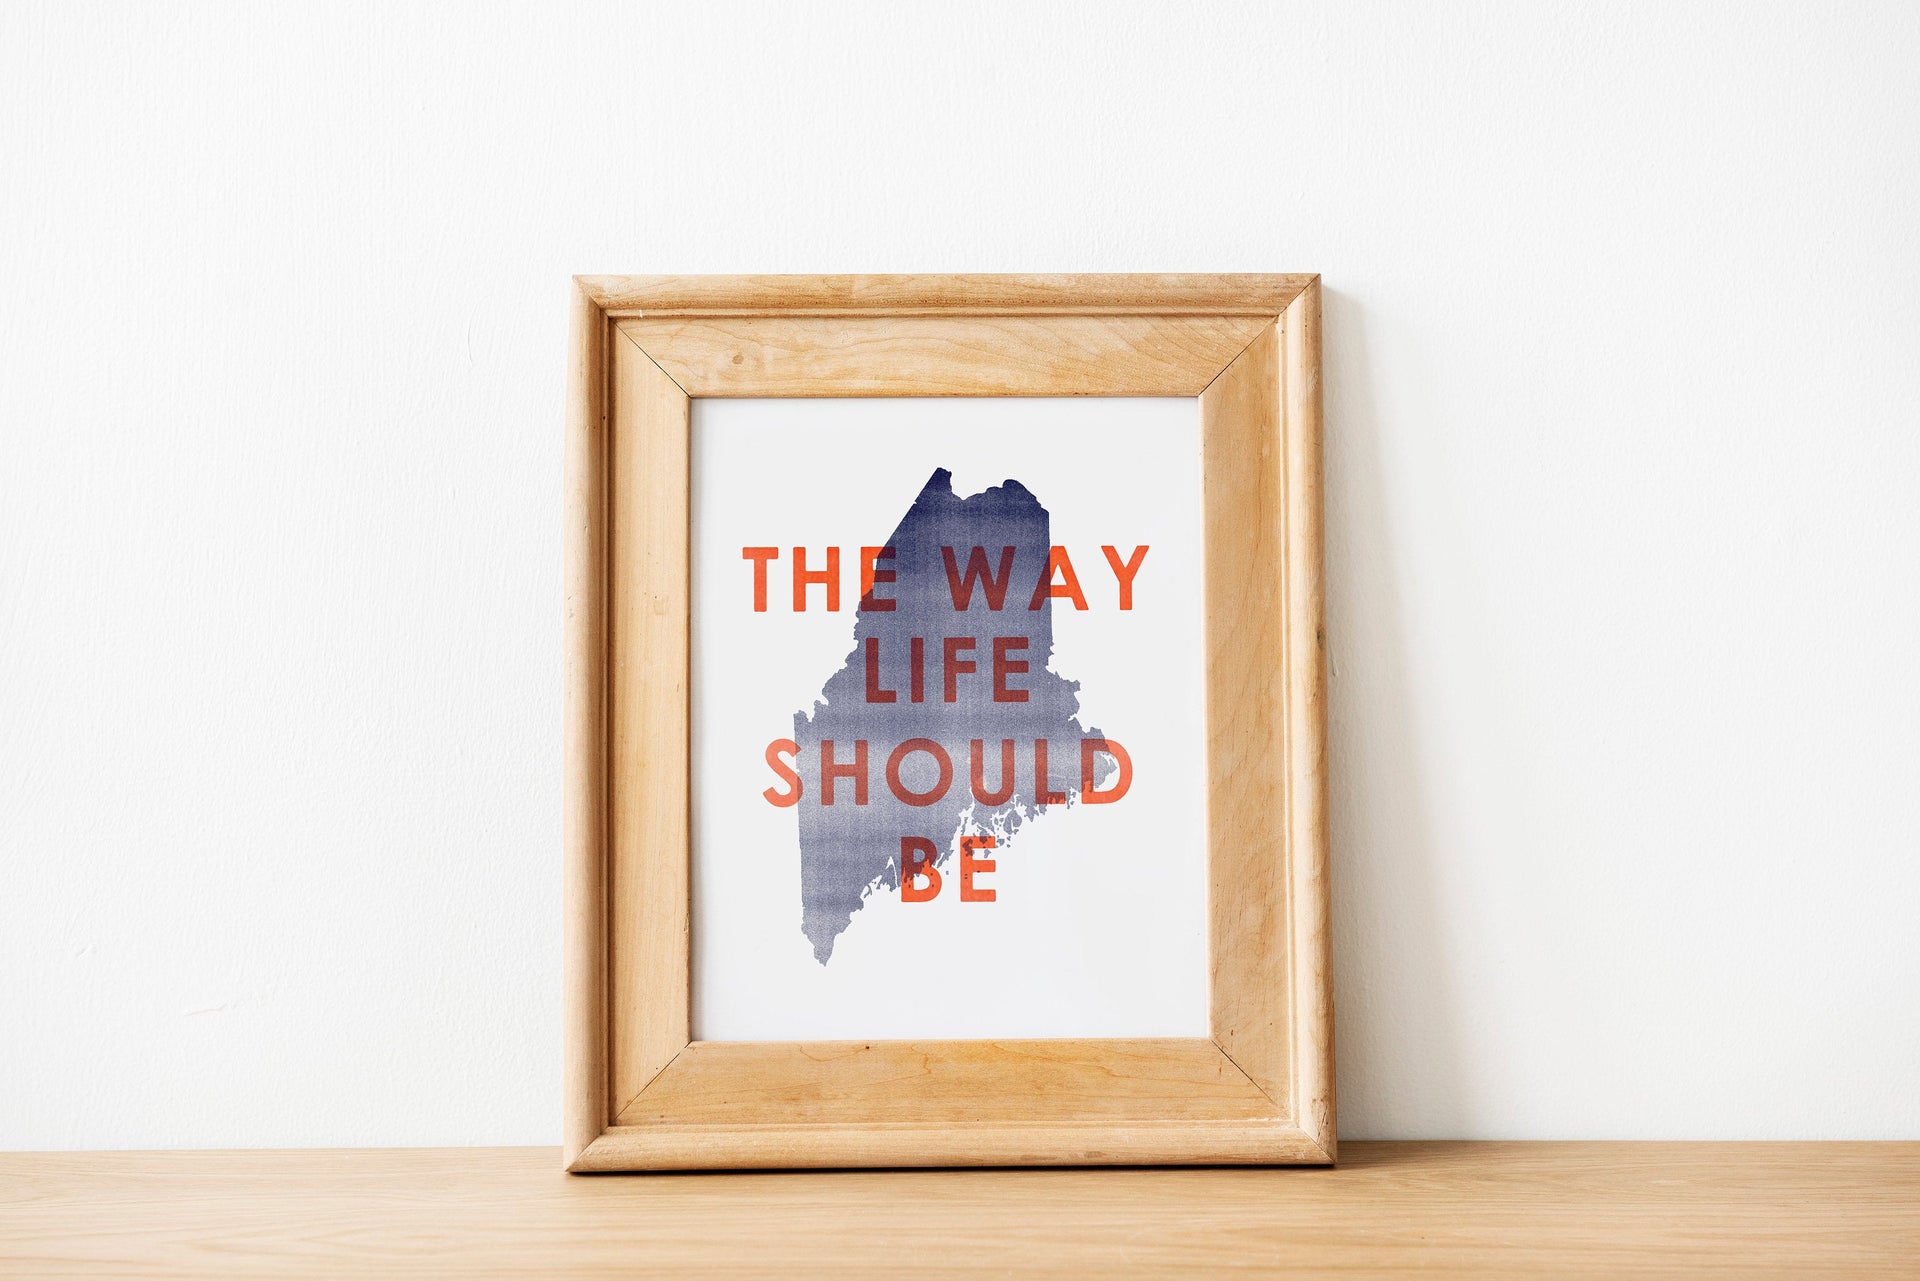 The Way Life Should Be Maine Print in Wood Frame by Gert & Co